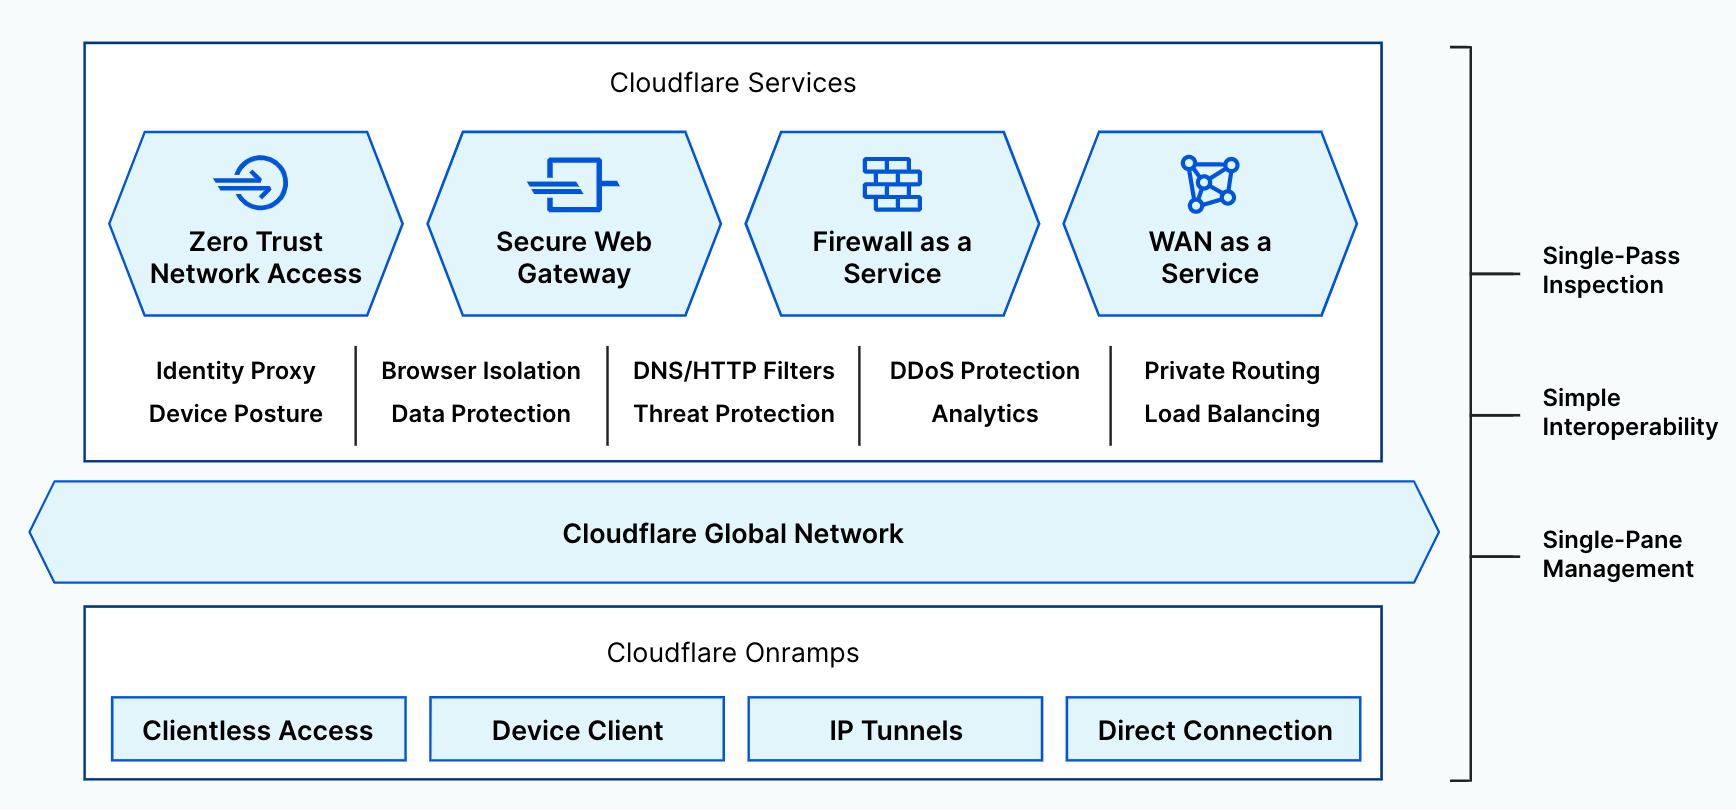 Cloudflare One Services running over the Cloudflare network